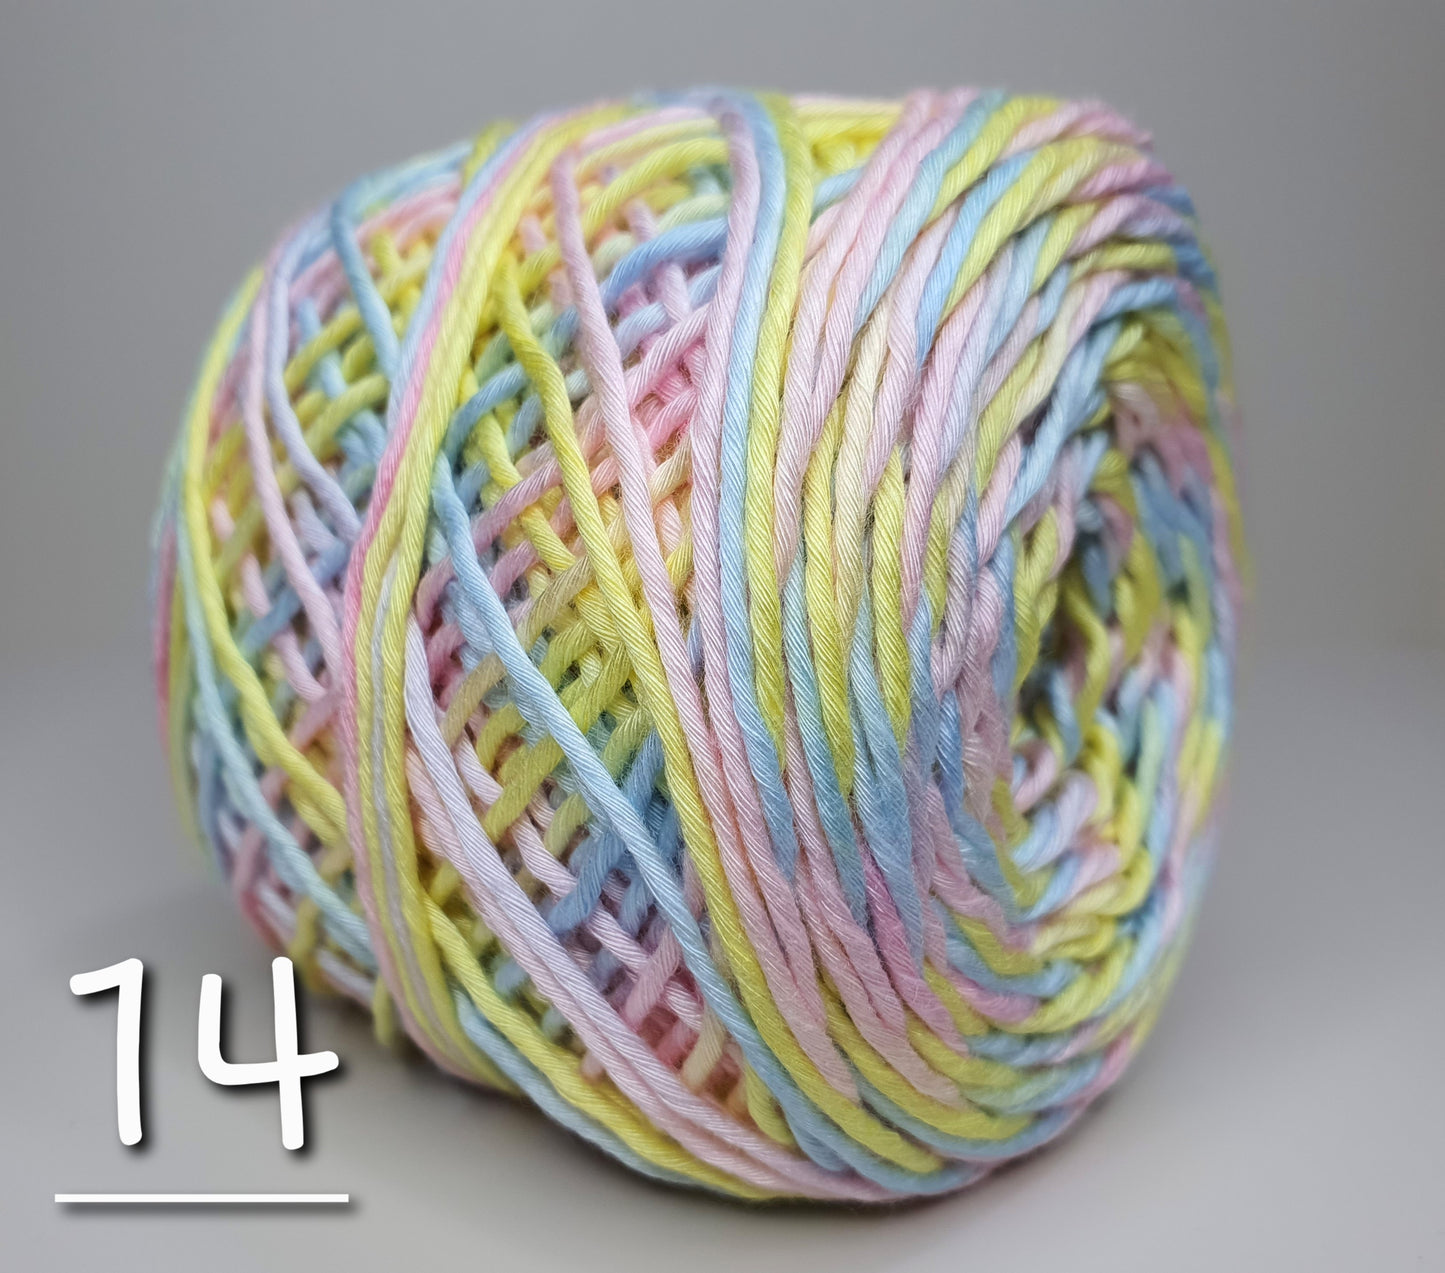 Cotton Yarn Mix Color 100g